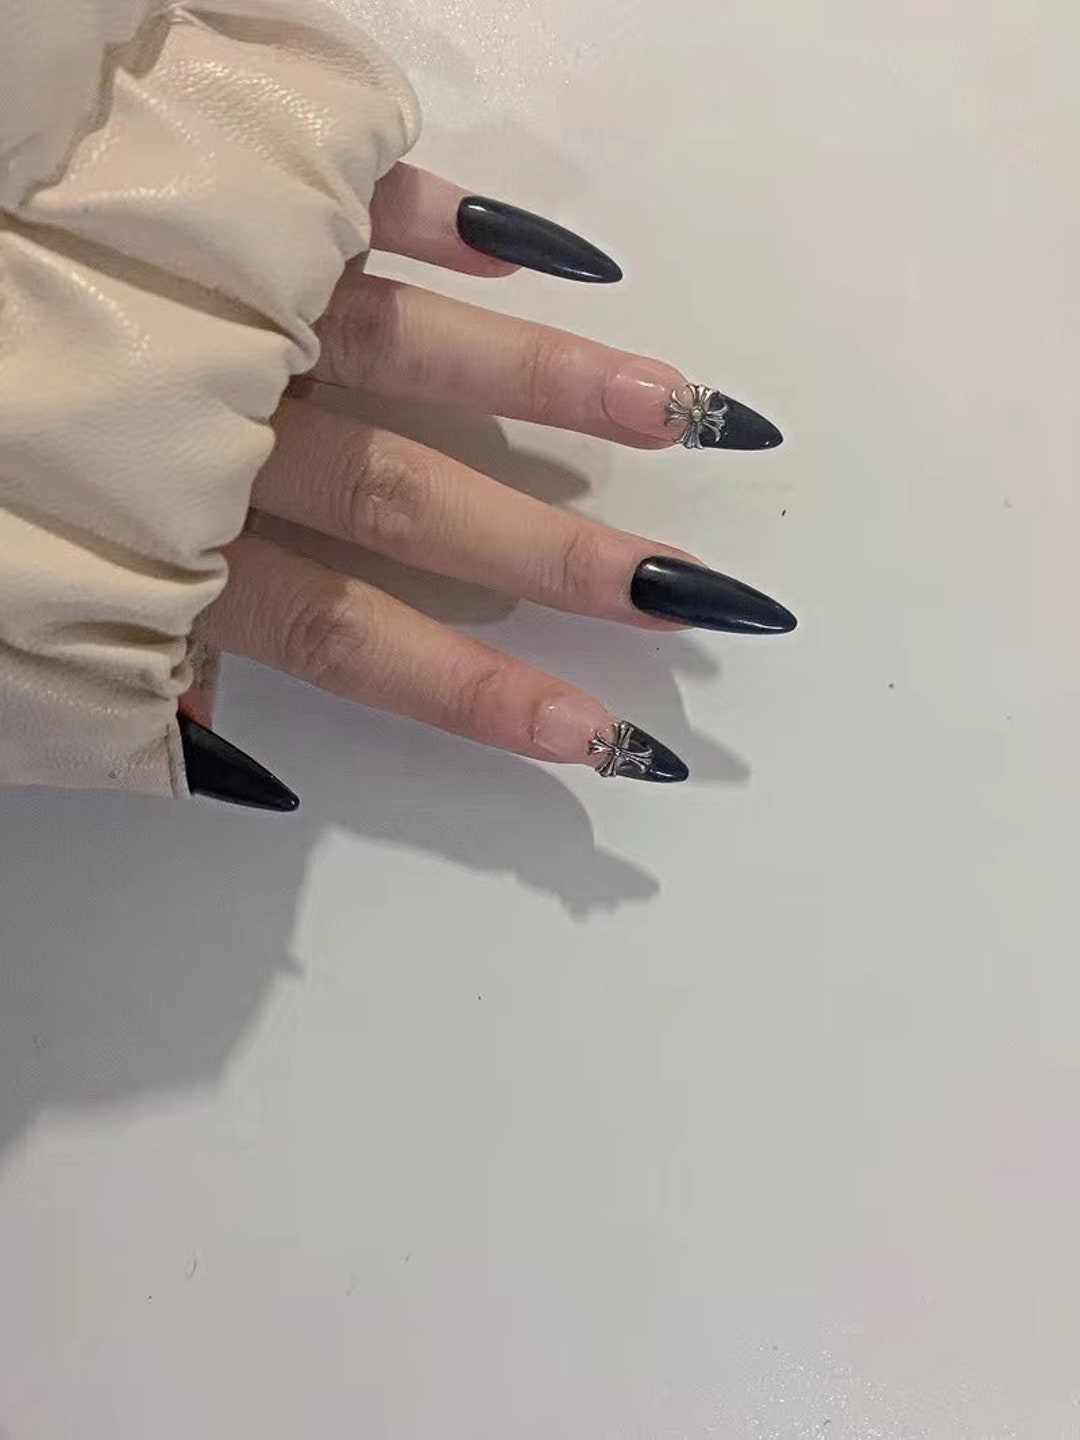 4 Emo Nail Designs That Are More Than Just Black – Maniology